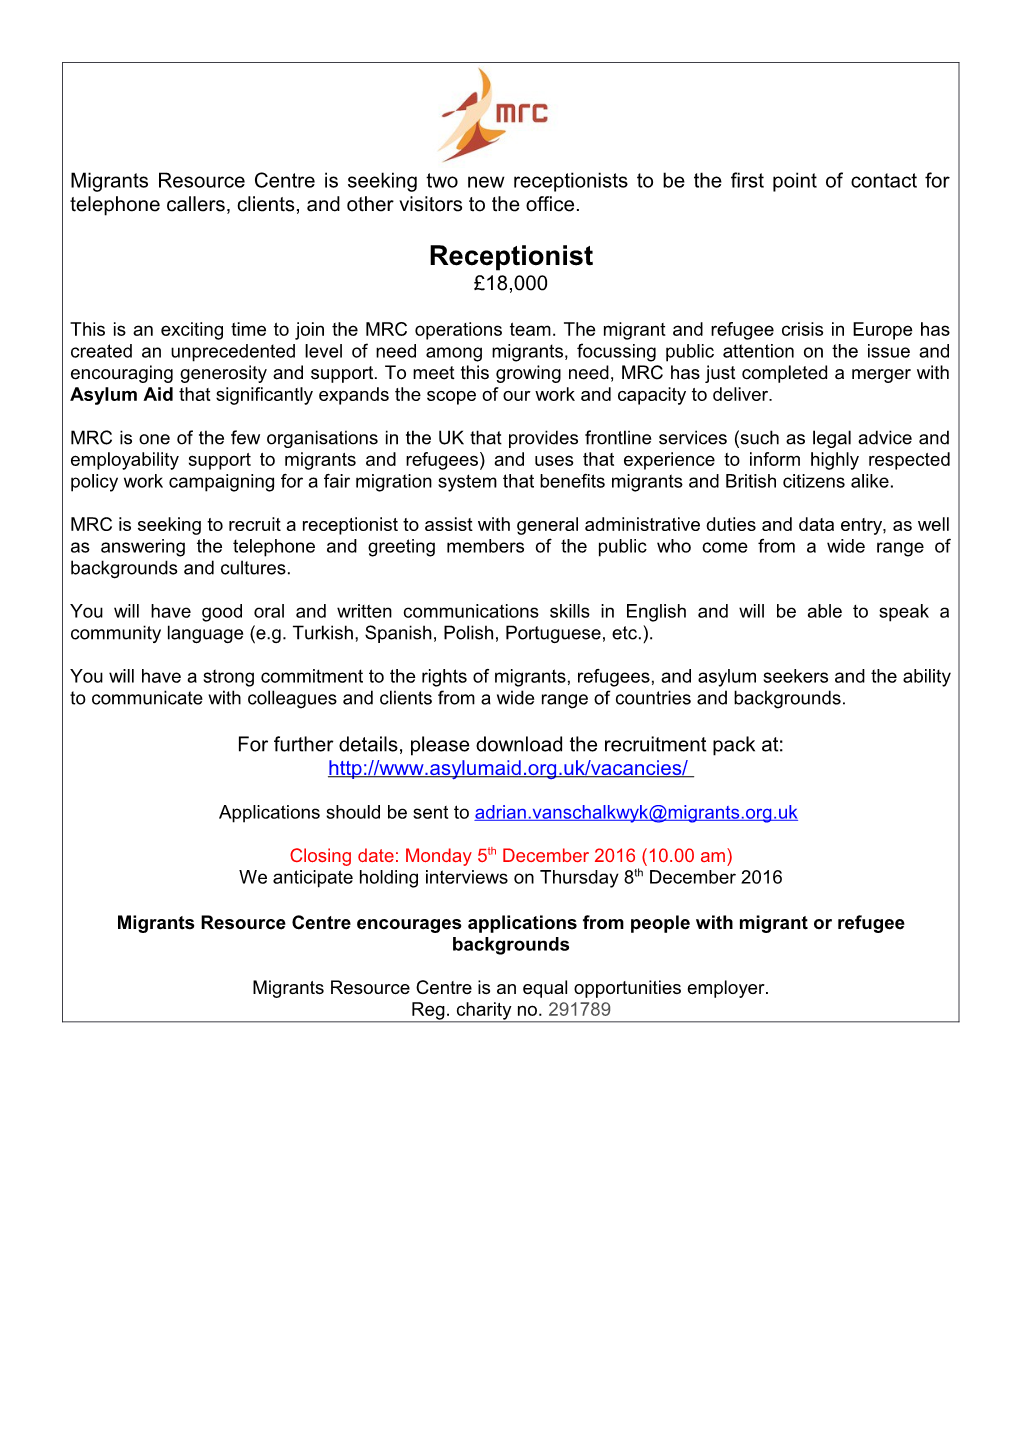 Migrants Resource Centre Is Seeking Two New Receptionists to Be the First Point of Contact